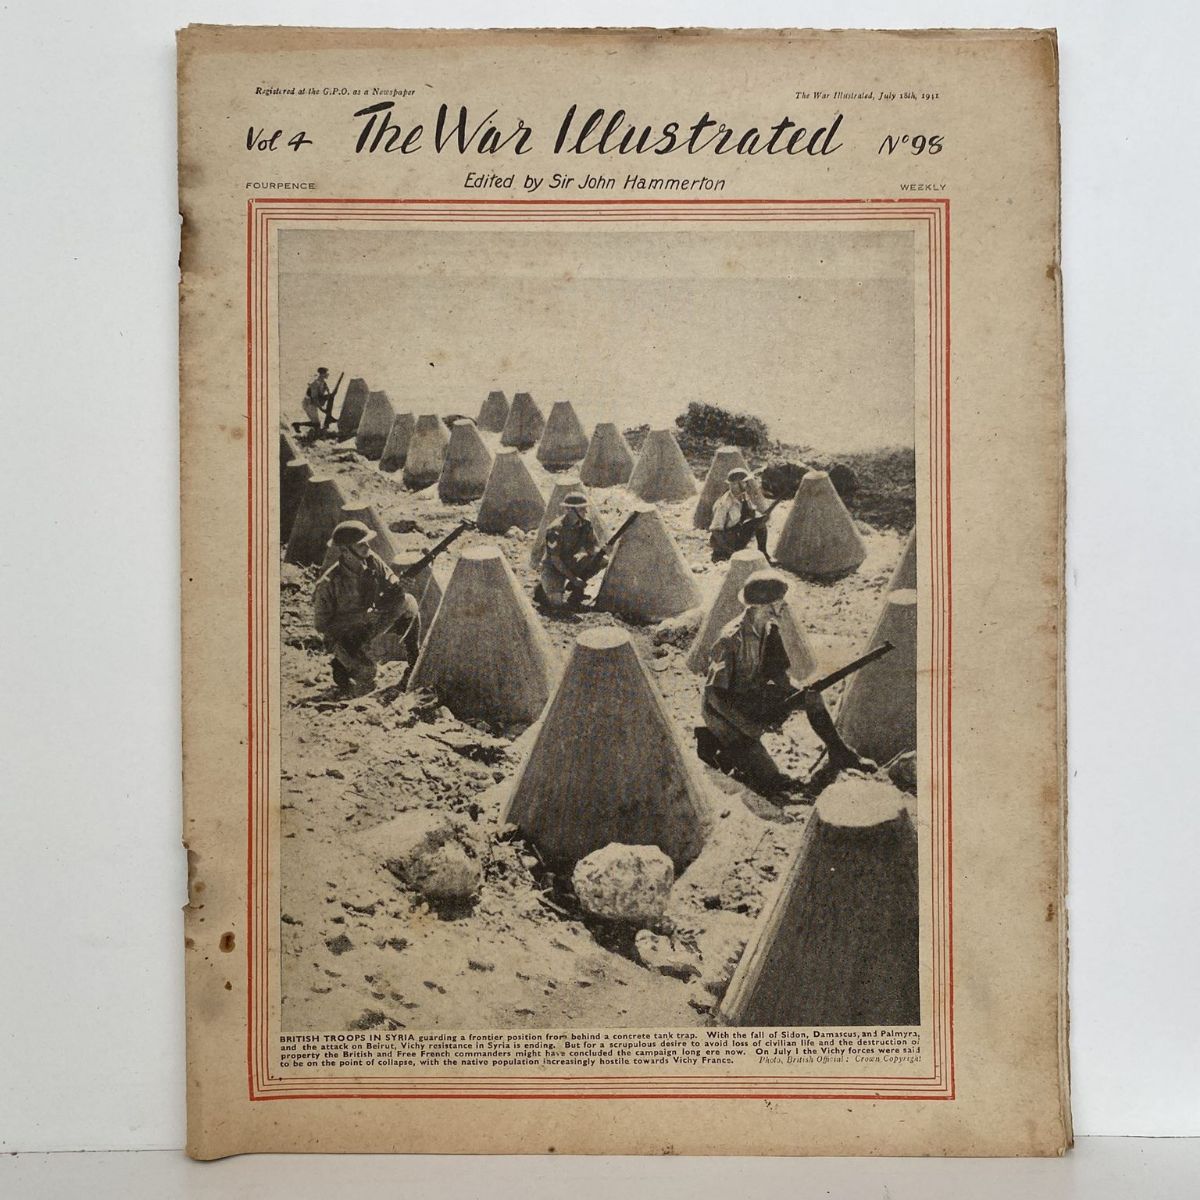 THE WAR ILLUSTRATED - Vol 4, No 98, 18th July 1941